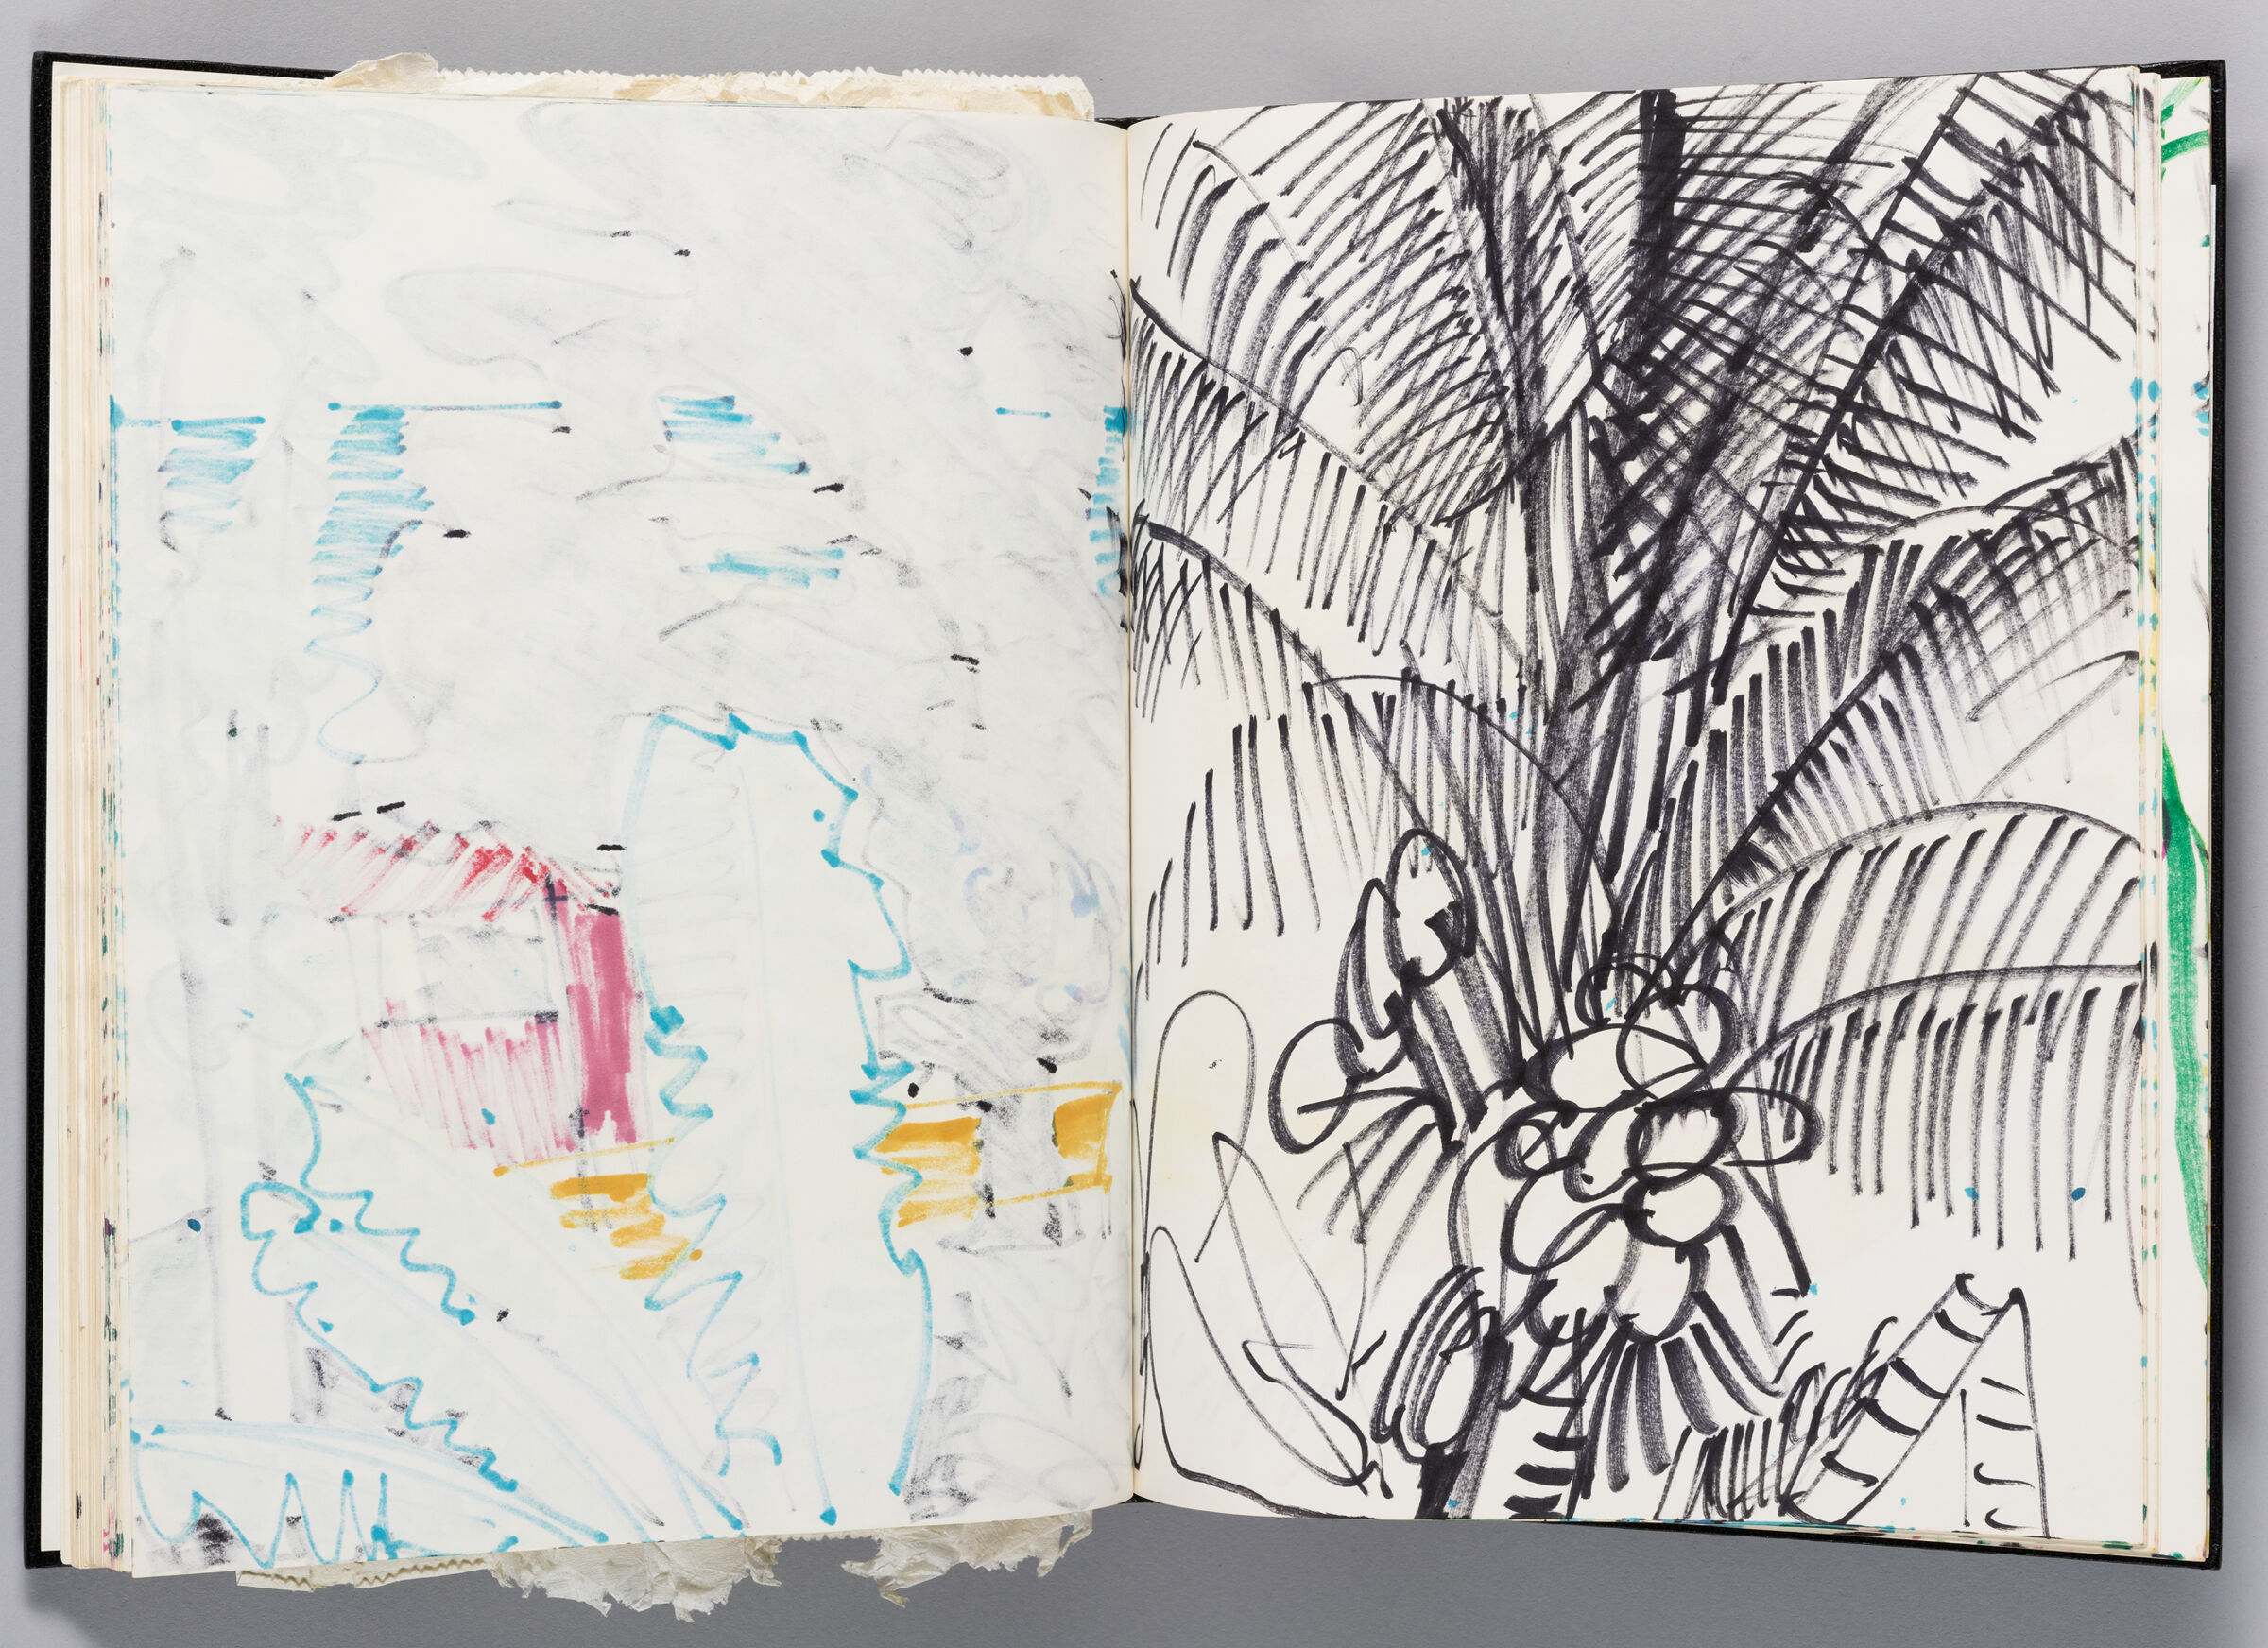 Untitled (Bleed-Through Of Previous Page, Left Page); Untitled (Palm Tree, Right Page)
